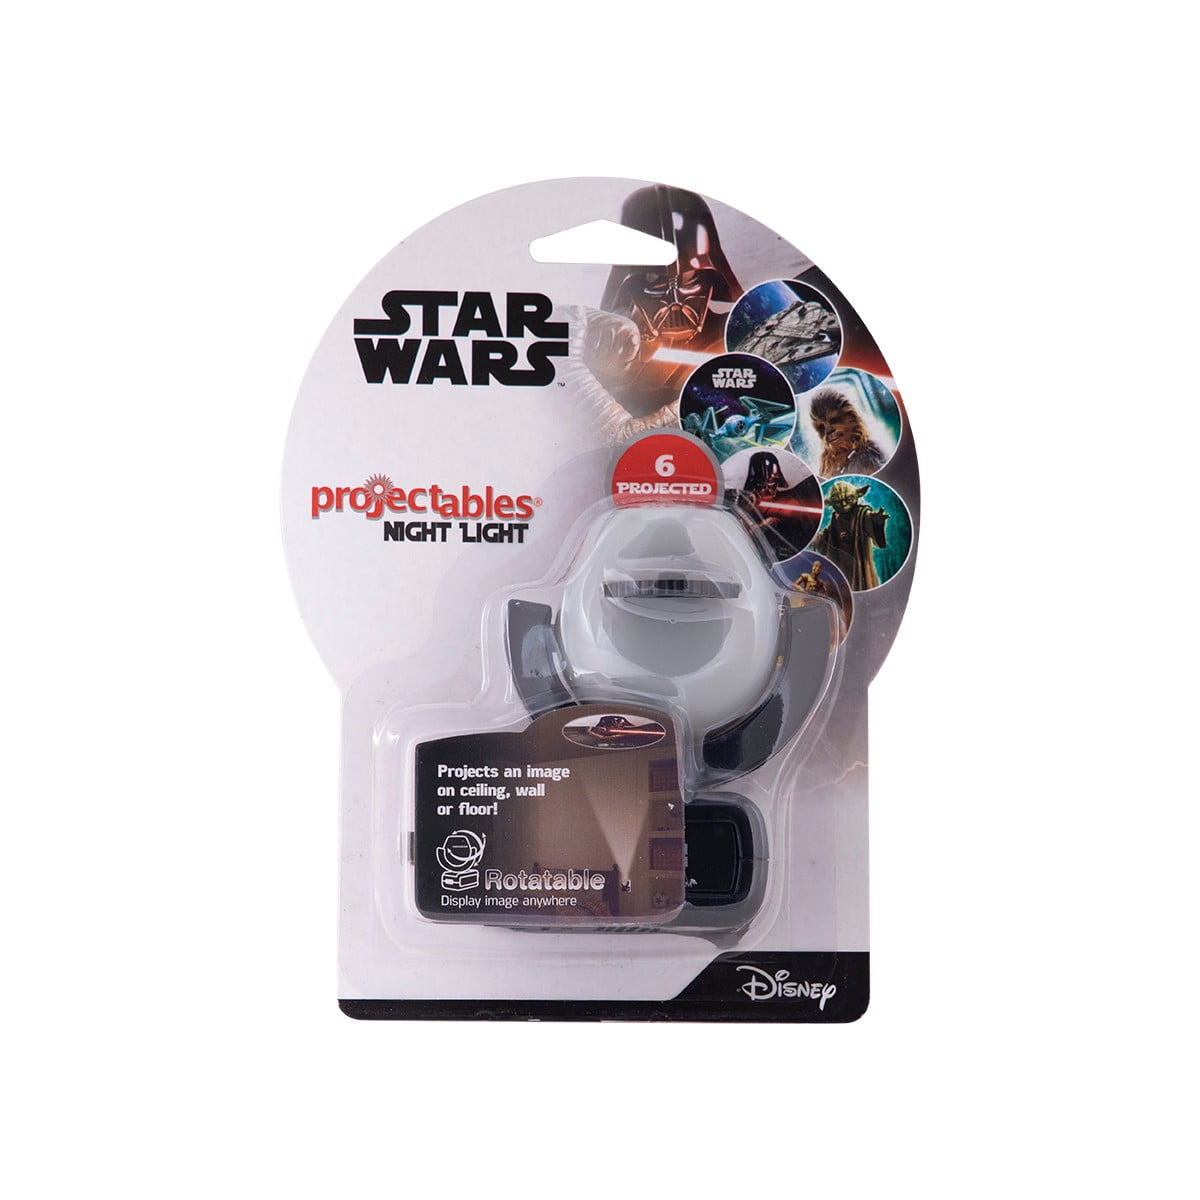 3R2.610 Disney Projectables Star Wars The Fighter LED Night Light NEW 